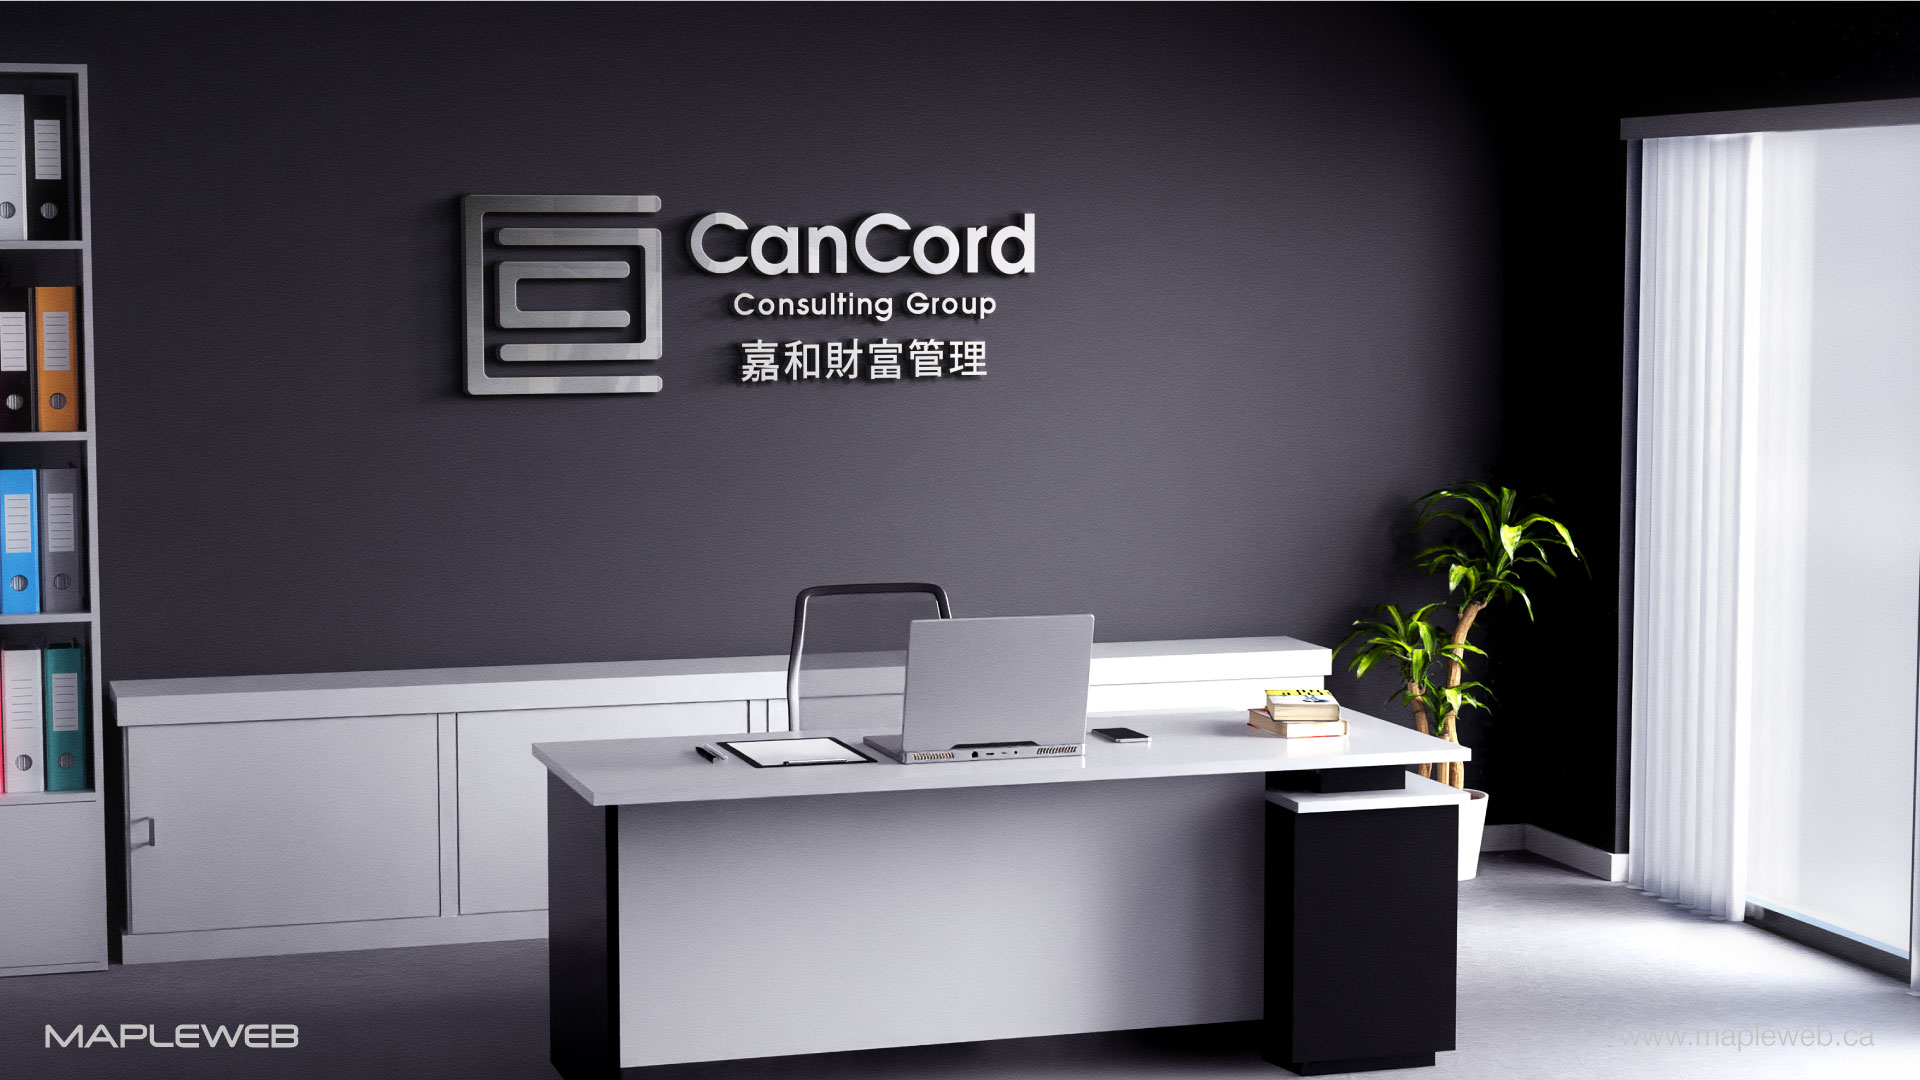 cancord-consulting-group-brand-logo-design-by-mapleweb-vancouver-canada-wall-mock